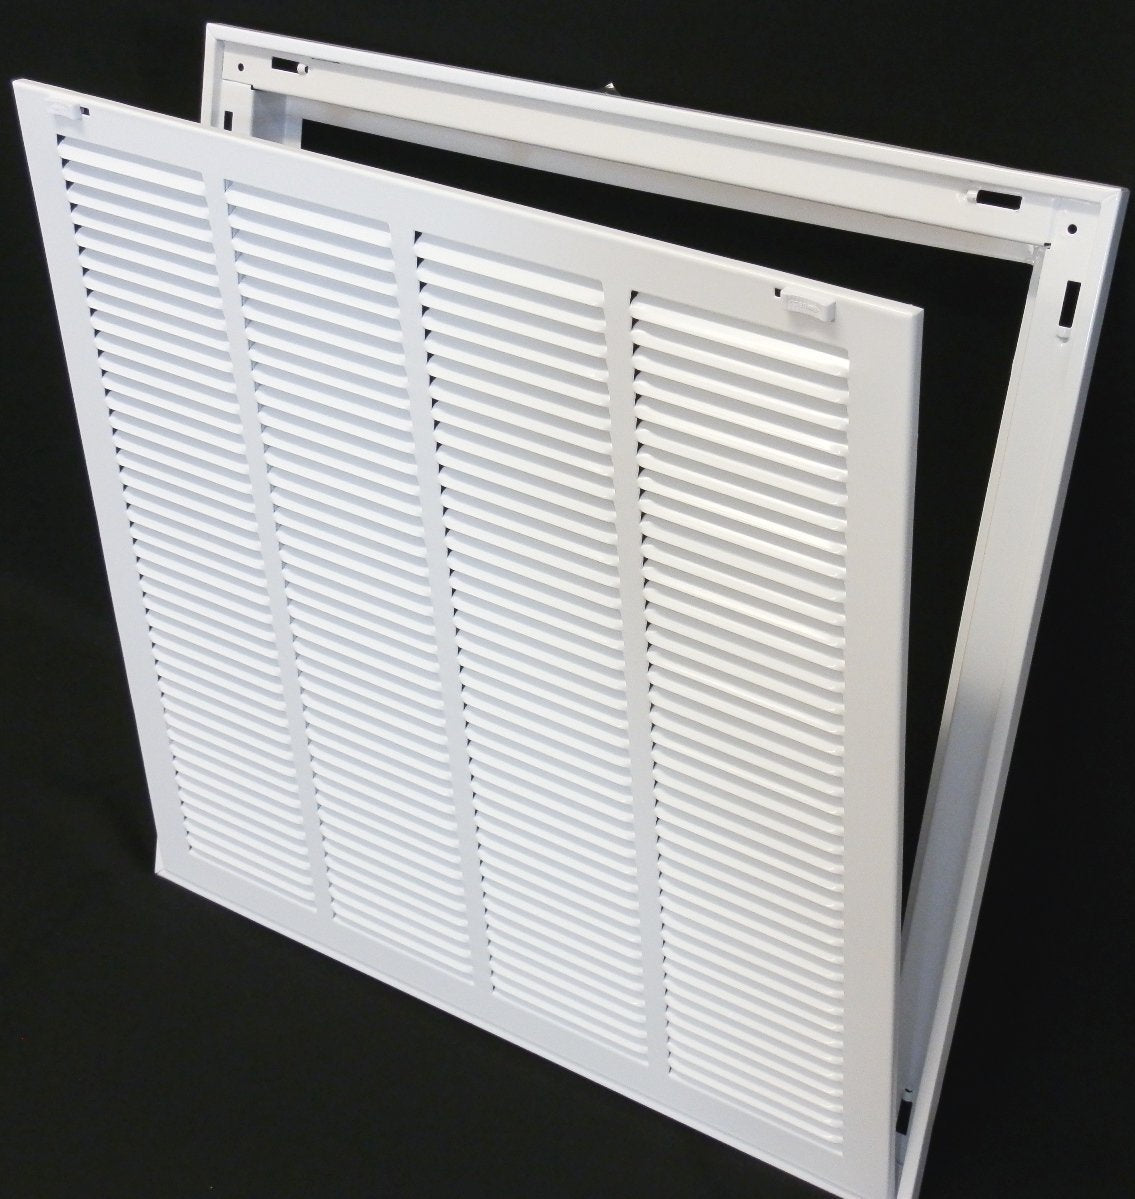 14&quot; X 28&quot; Steel Return Air Filter Grille for 1&quot; Filter - Removable Frame - [Outer Dimensions: 16 5/8&quot; X 30 5/8&quot;]